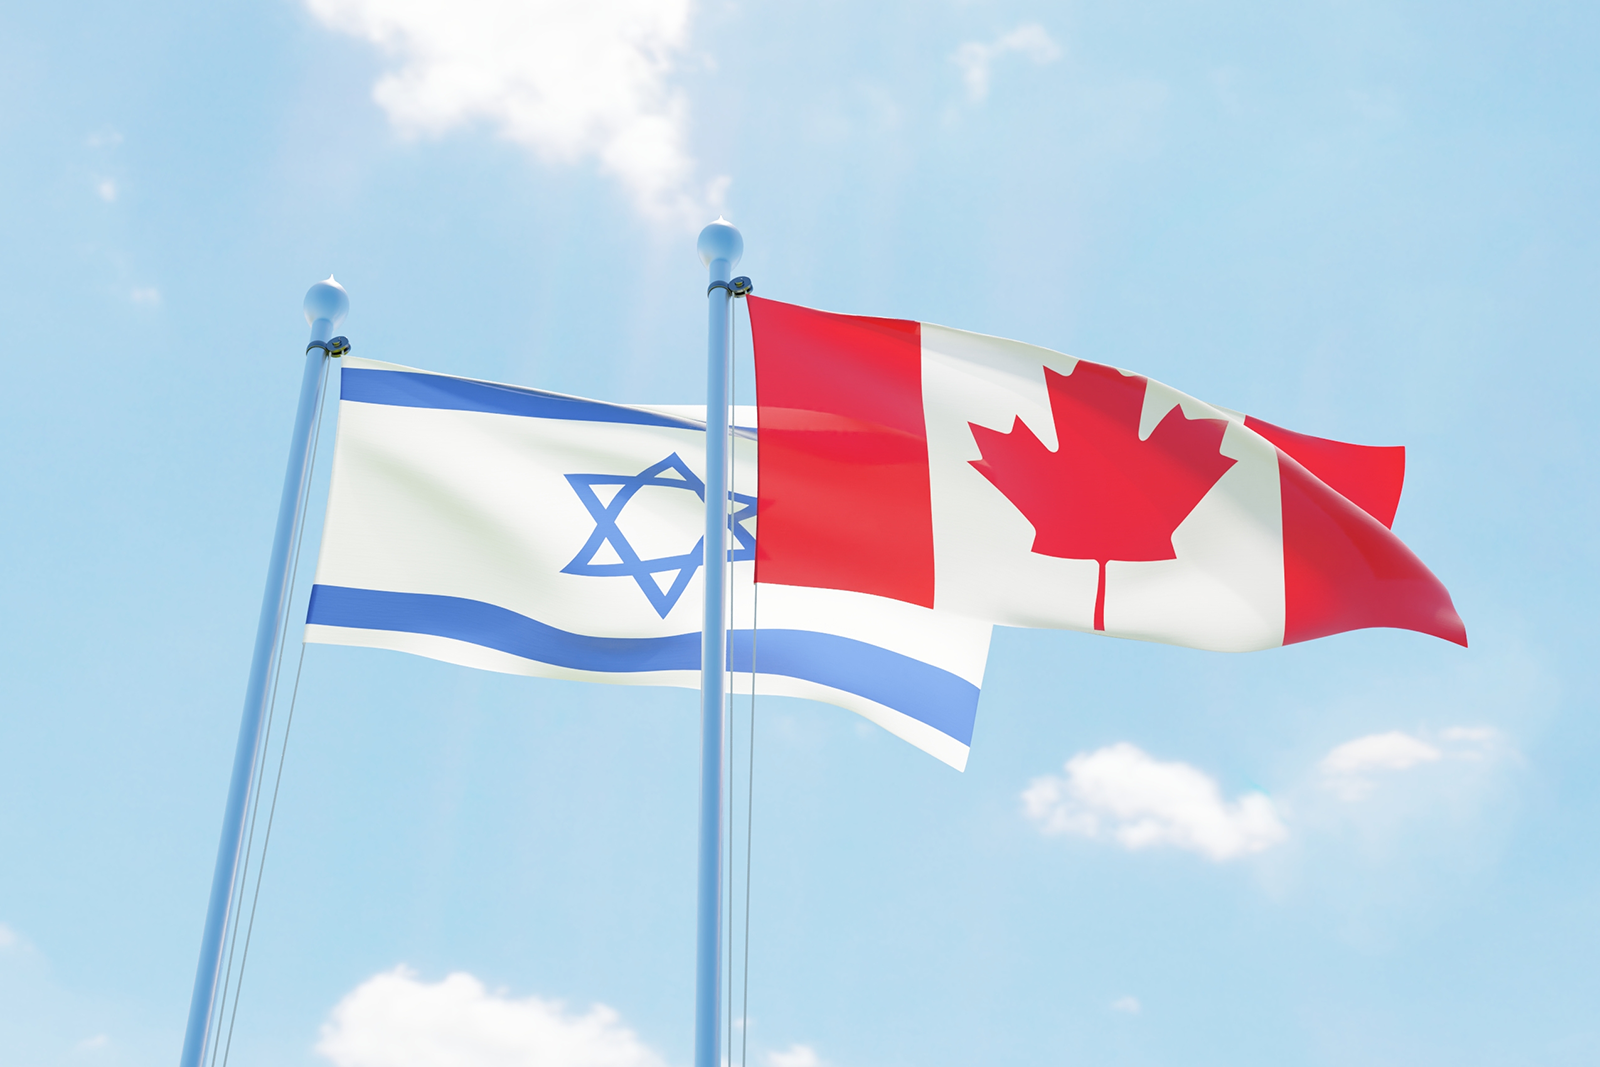 Israel and Canada flags on flag poles with a blue sky in the background.